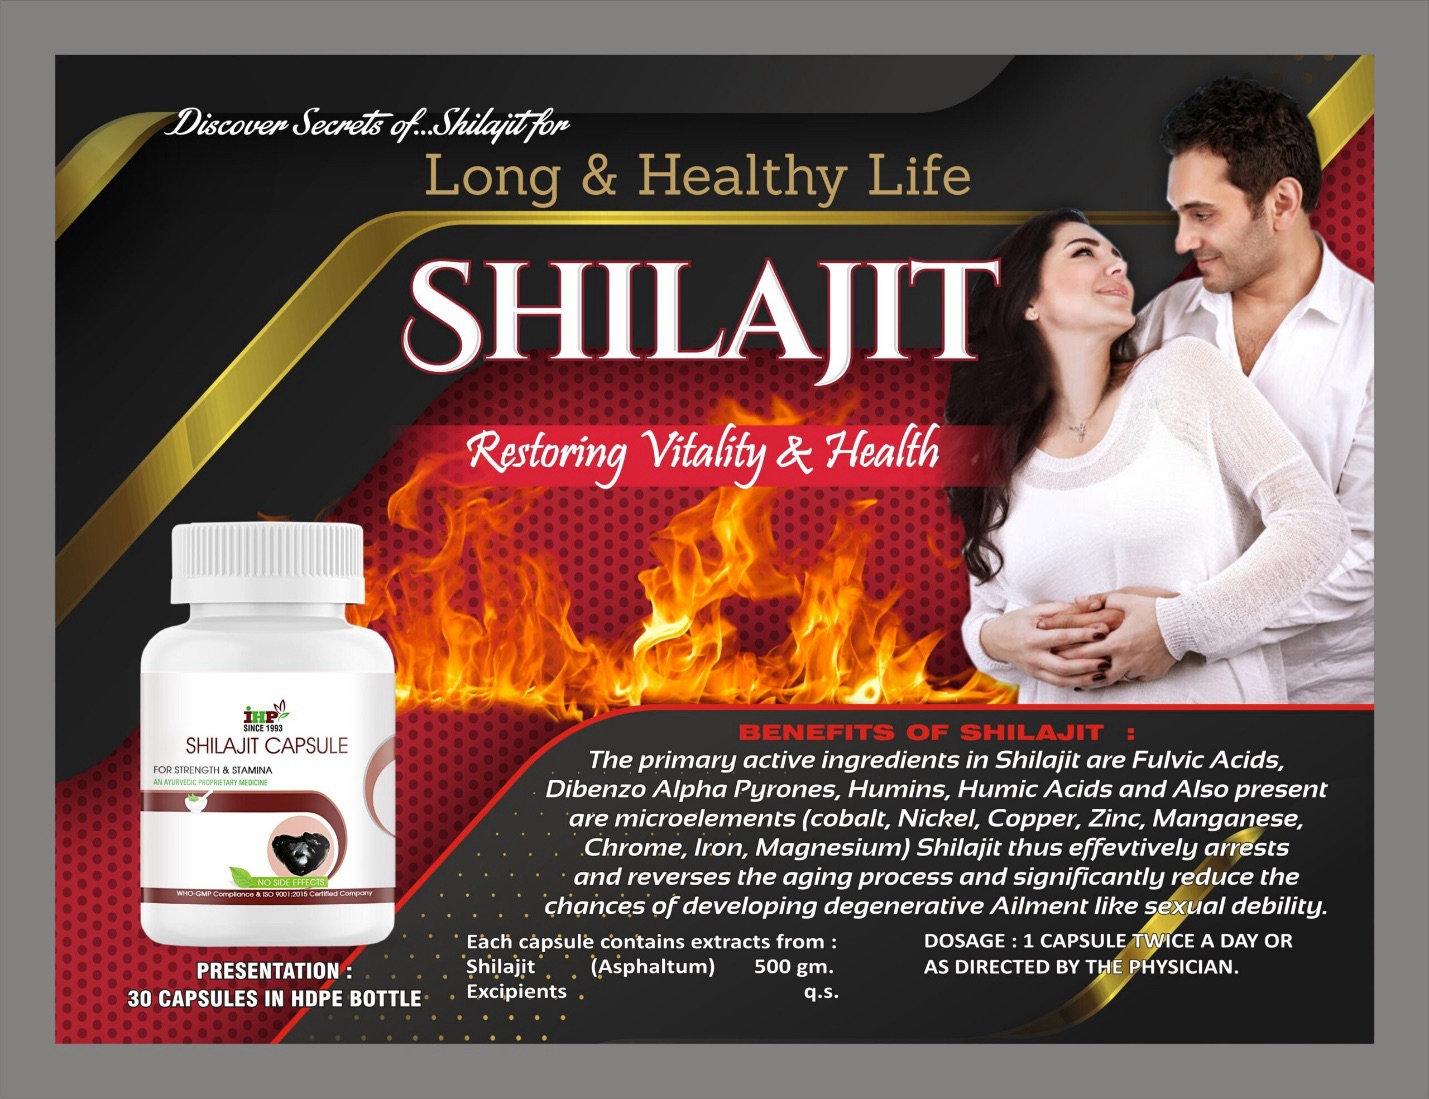 Shilajit: potential natural cancer treatment, regulates heart rate, treats infertility, diabetes, and sexual function